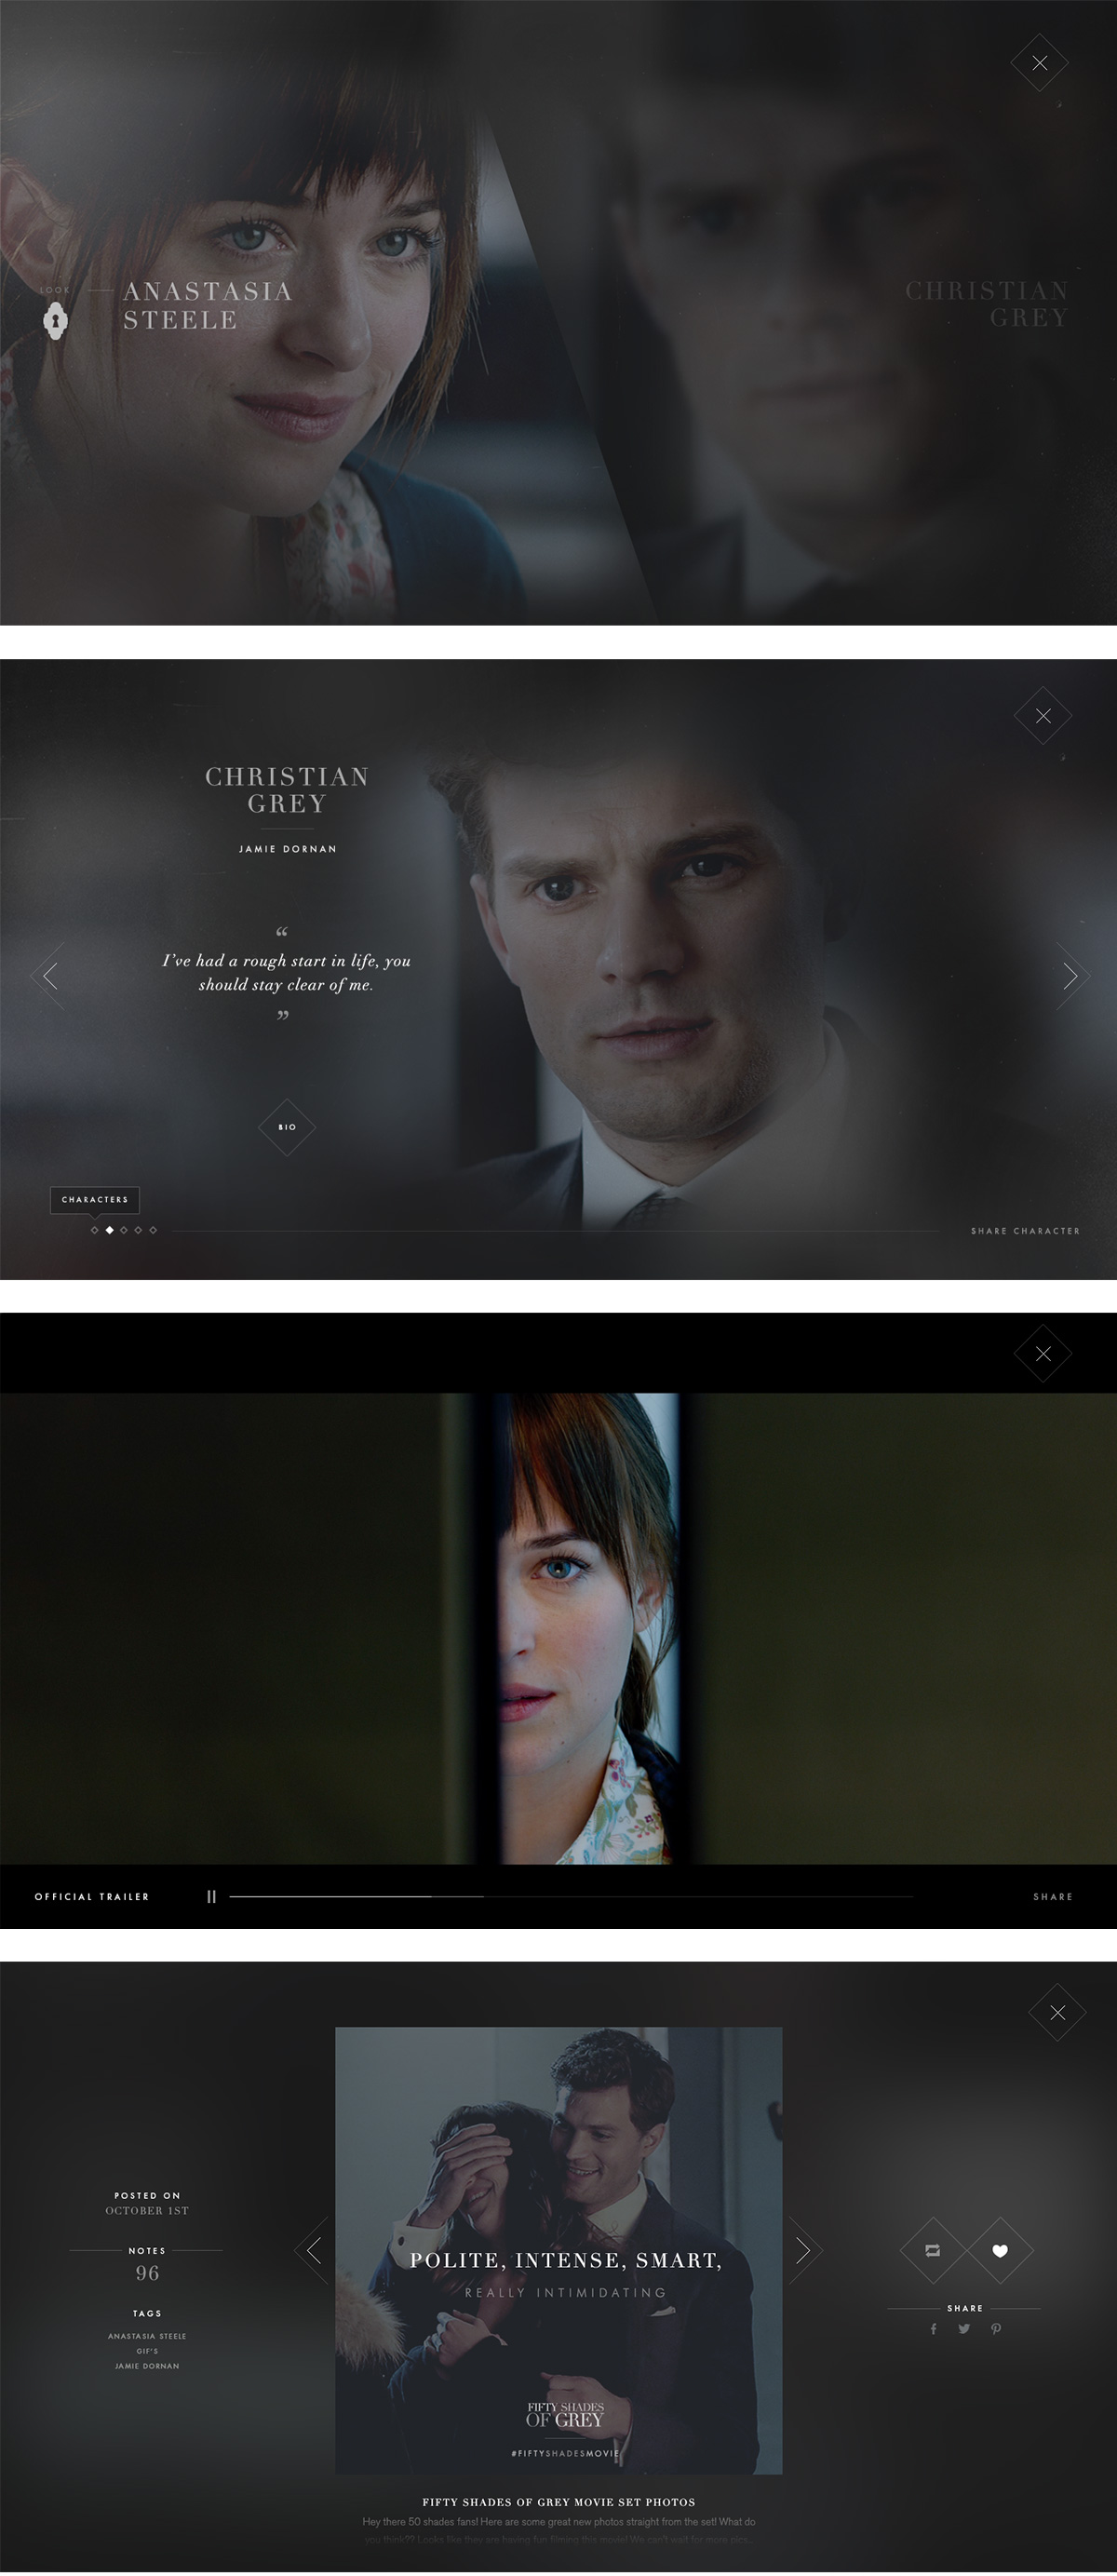 Fifty Shades of Grey by keithevans.com